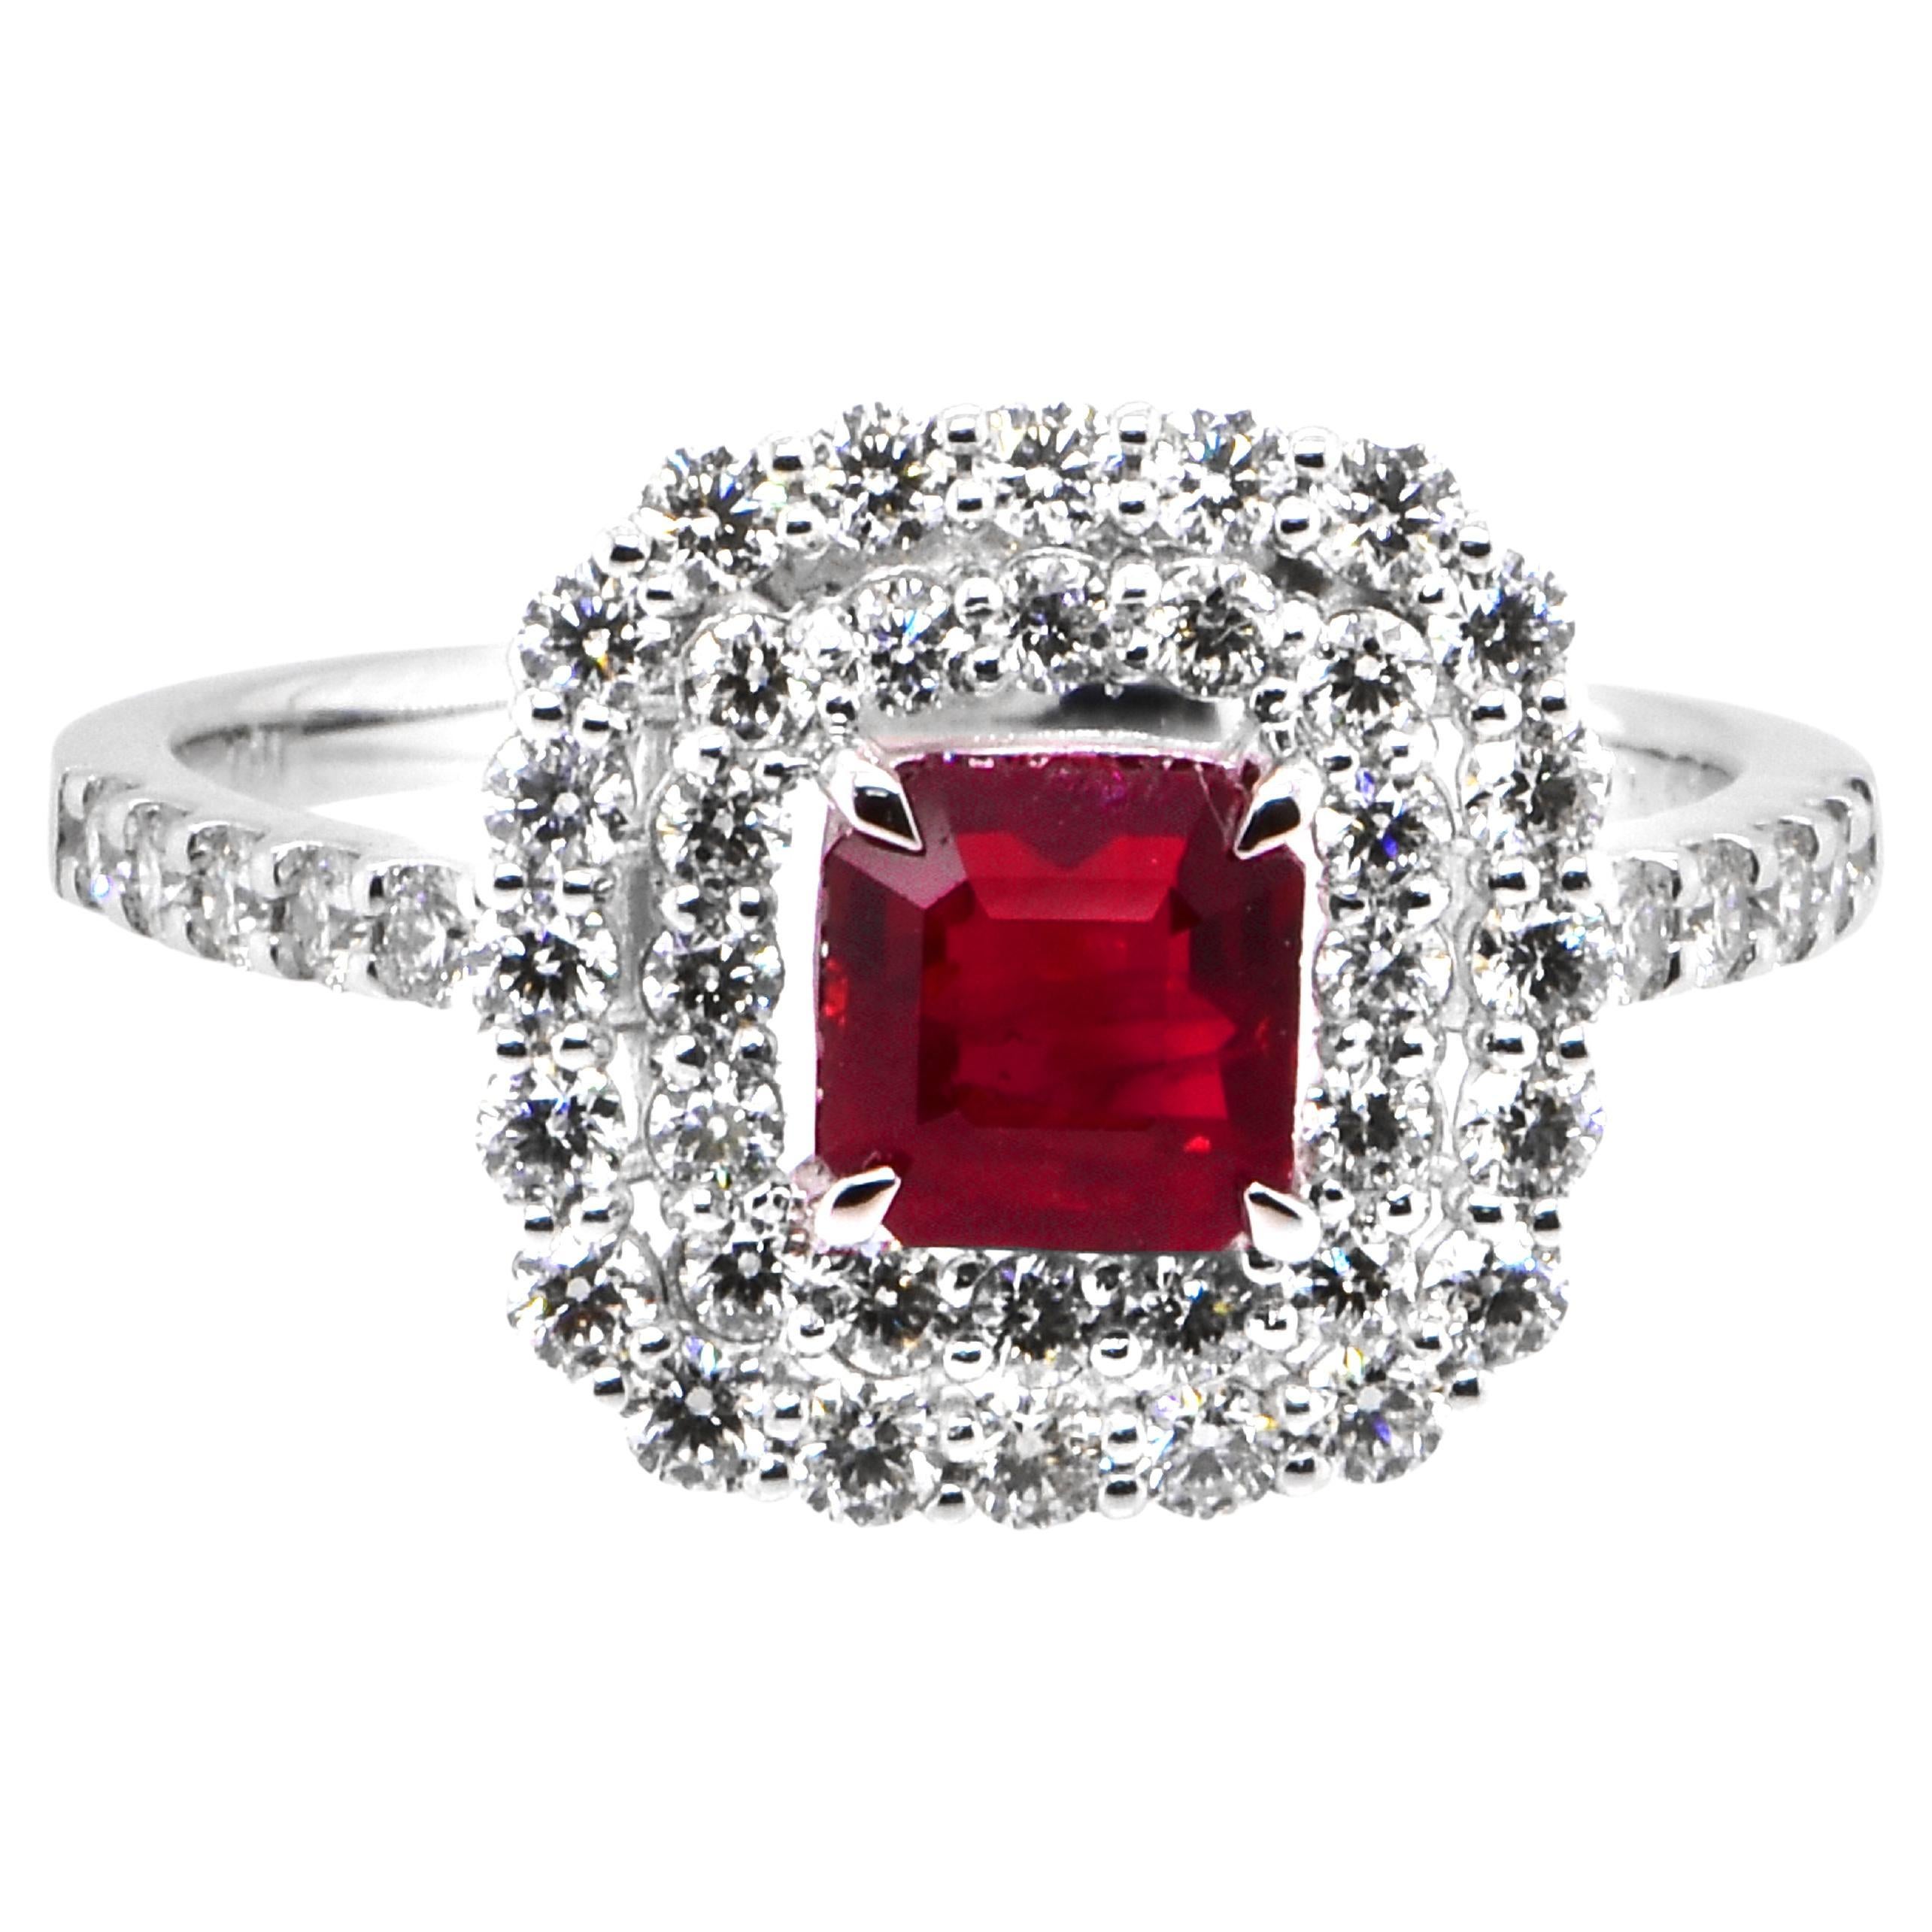 GIA Certified 1.01 Carat, Pigeon Blood Red, Burmese Ruby Ring Made in Platinum For Sale